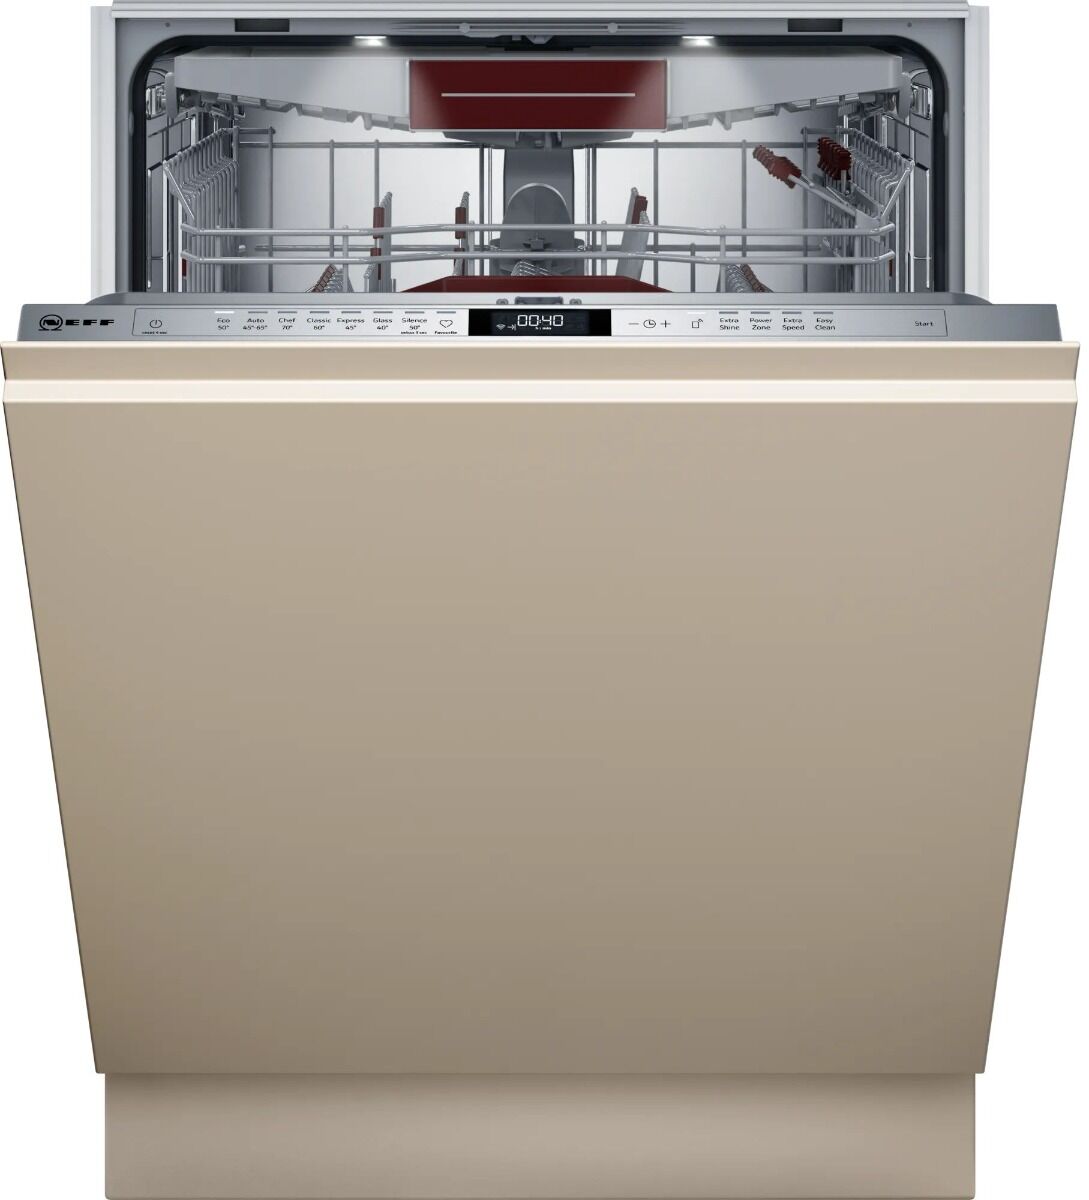 NEFF S187ZCX43G Wifi Connected Fully Integrated Dishwasher - Stainless Steel